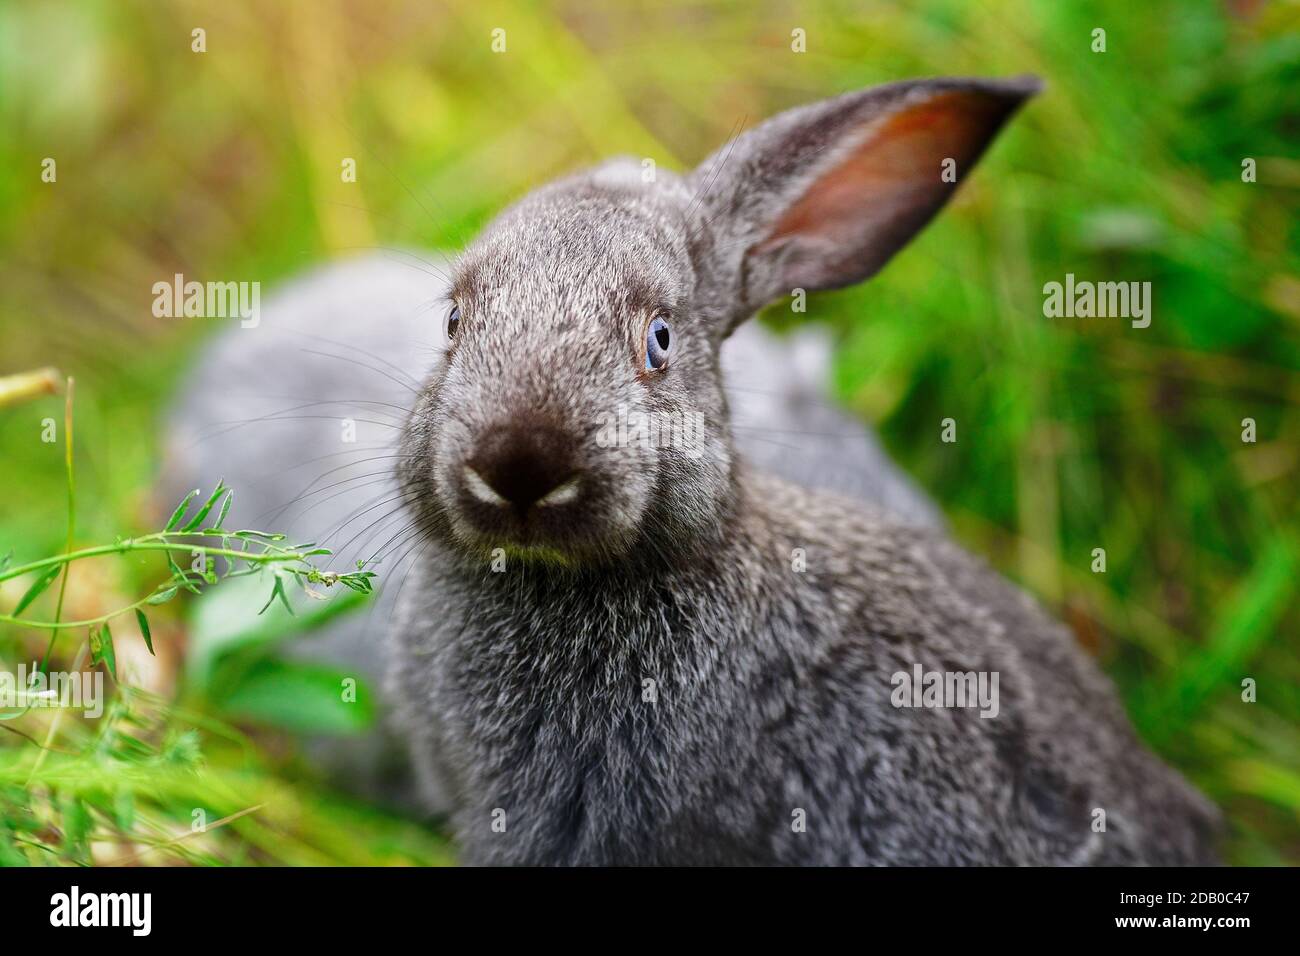 A small rabbit eats grass. Portrait of a fluffy and charming pet for a calendar or postcard. Stock Photo